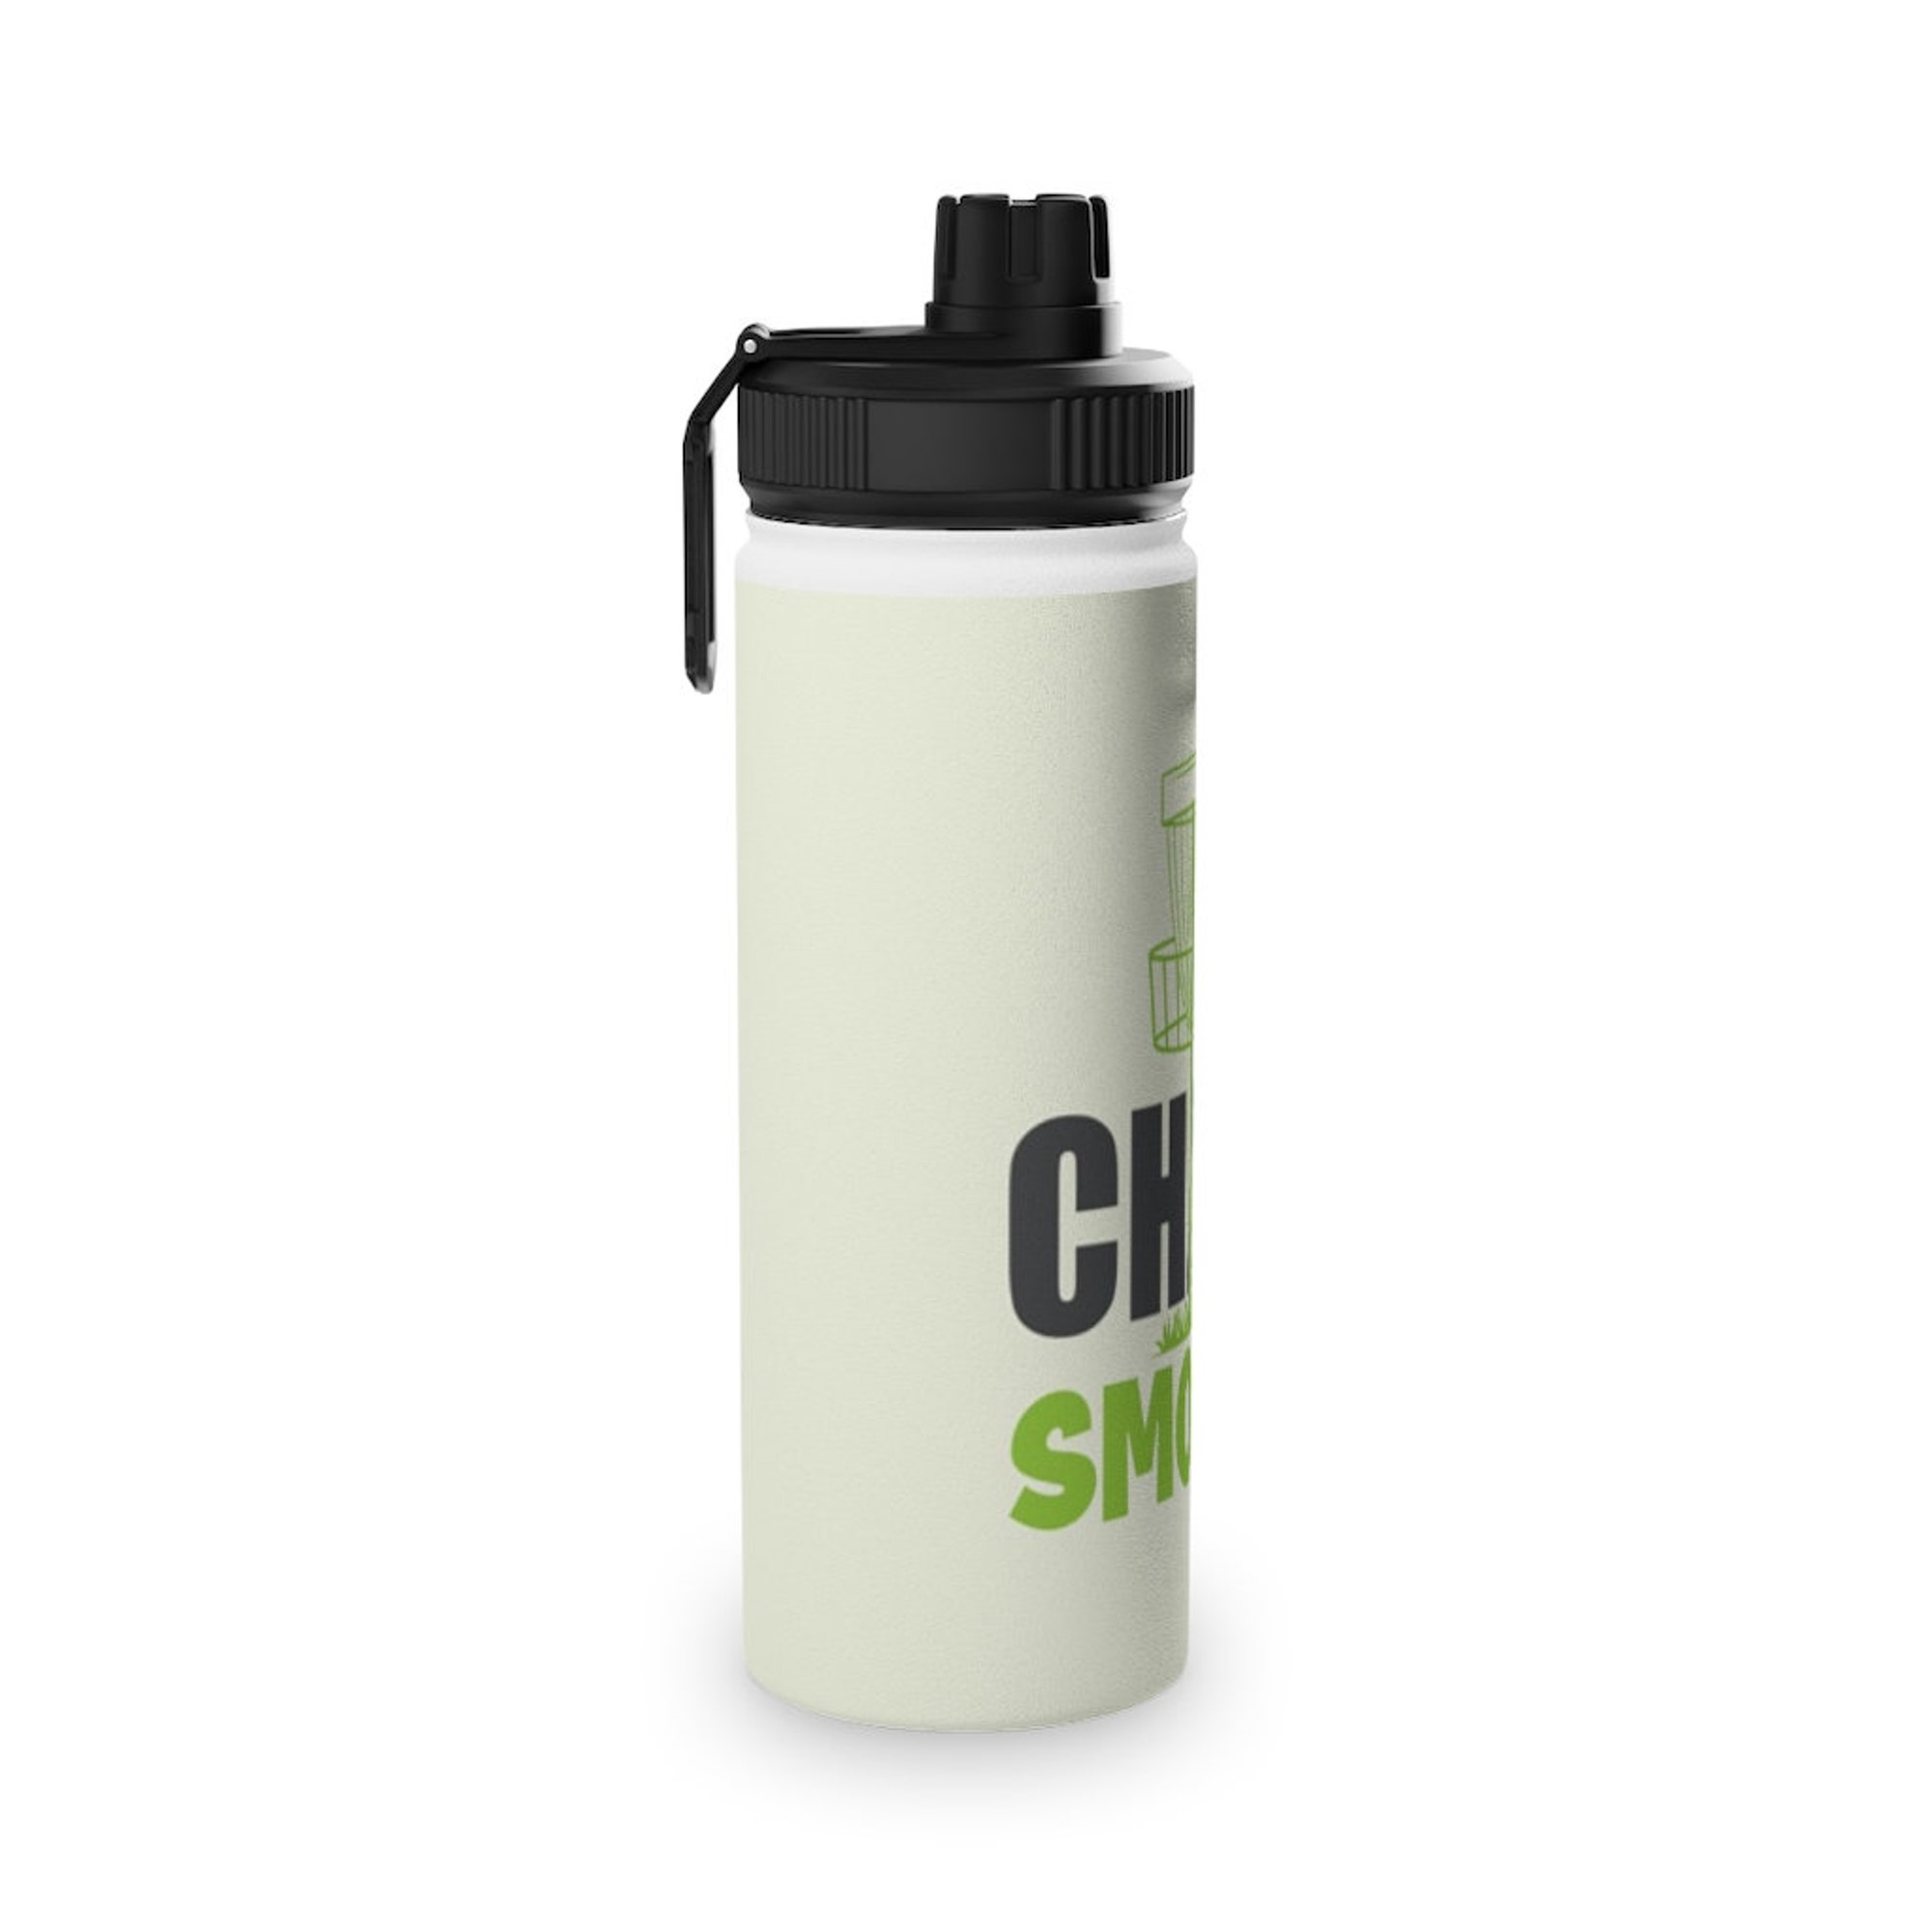 Disc Golf Stainless Steel Water Bottle, Sports Lid